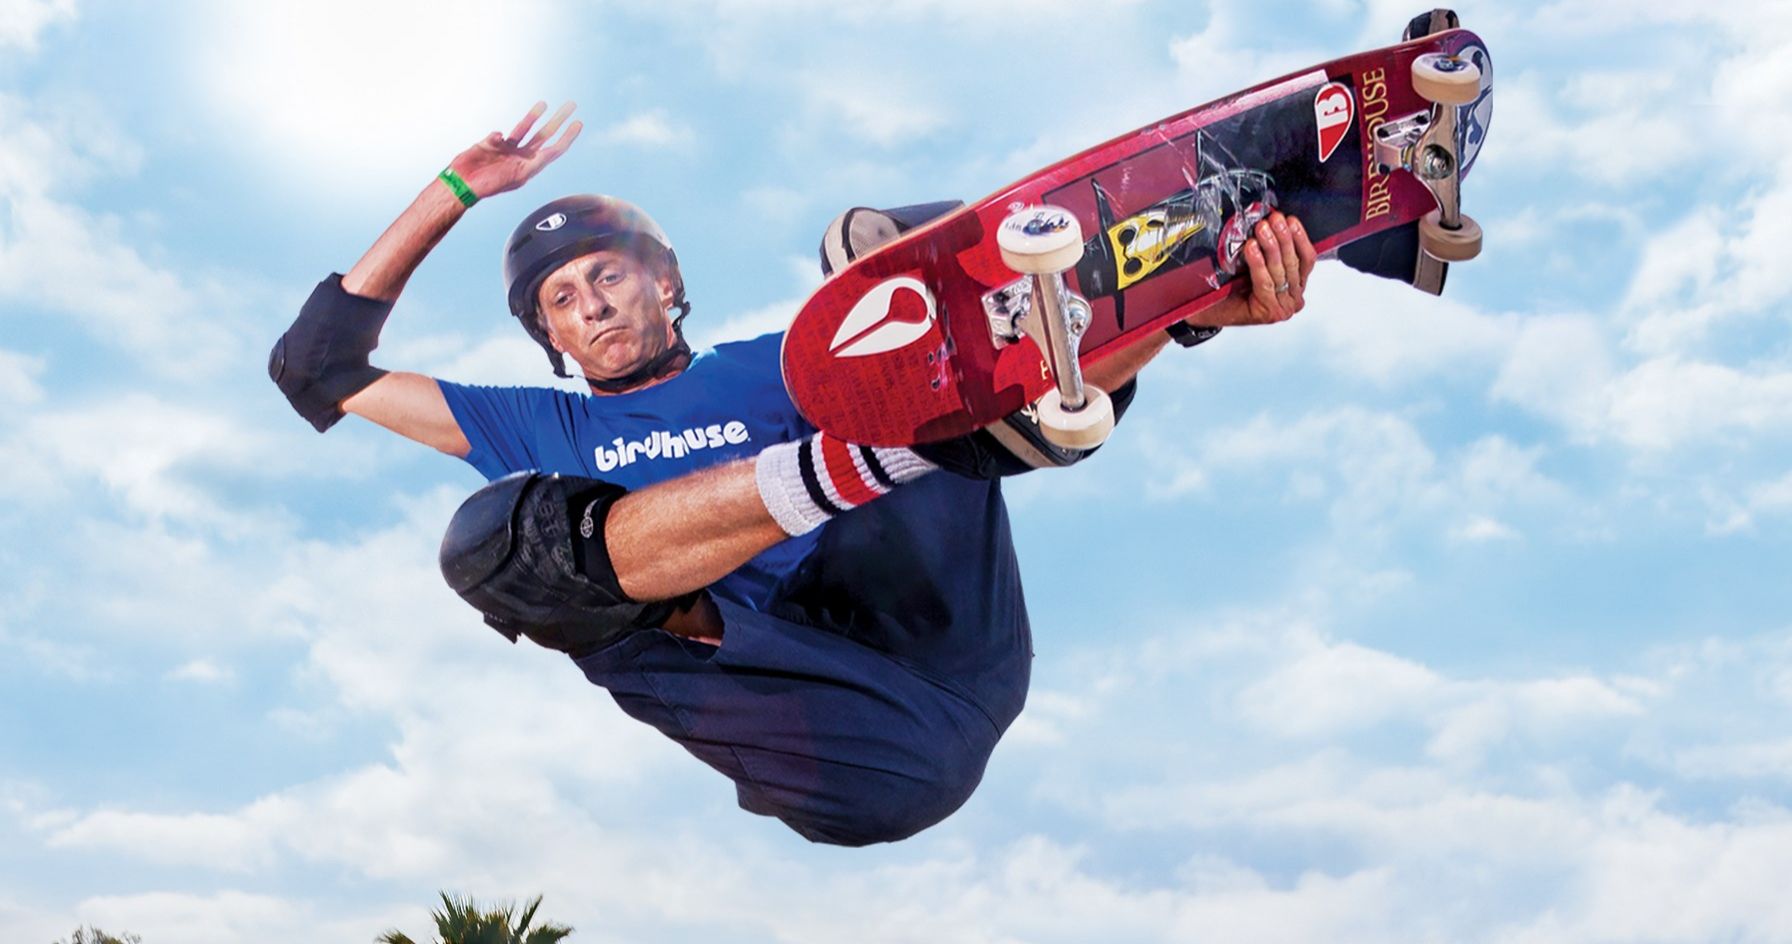 Tony Hawk Is Grateful for Saturday Night Live Pro Skater Video Game Shout-Out